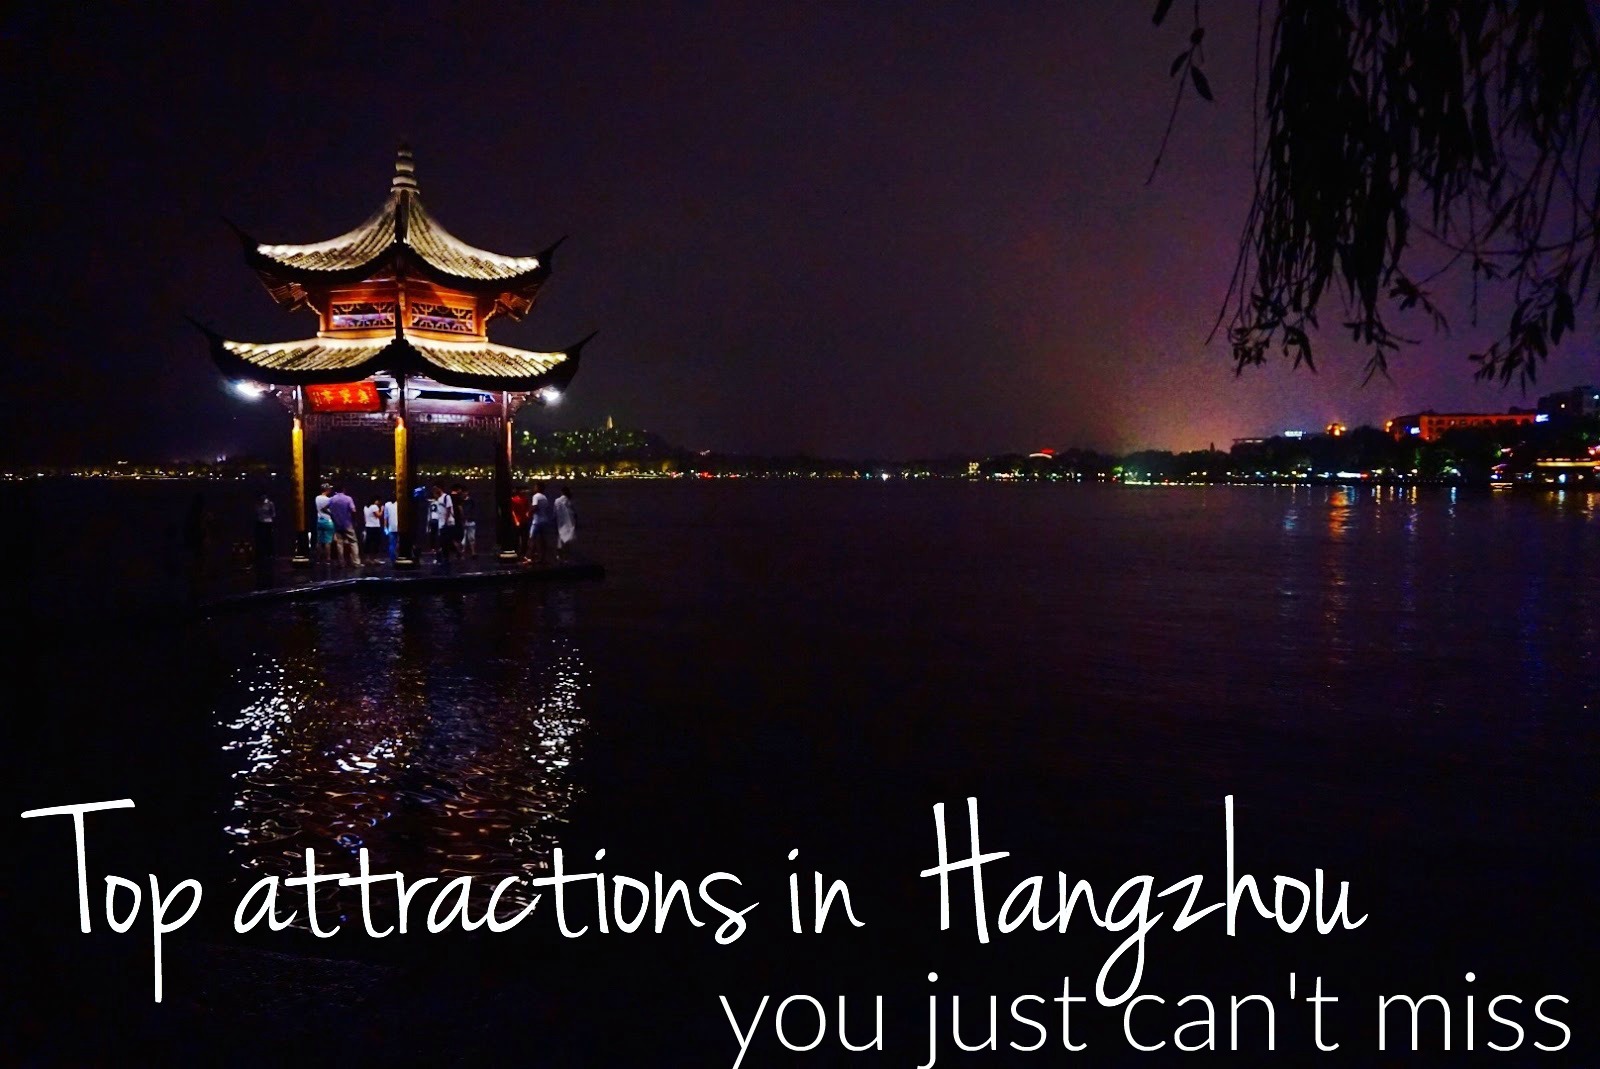 Top attractions in Hangzhou you just can’t miss